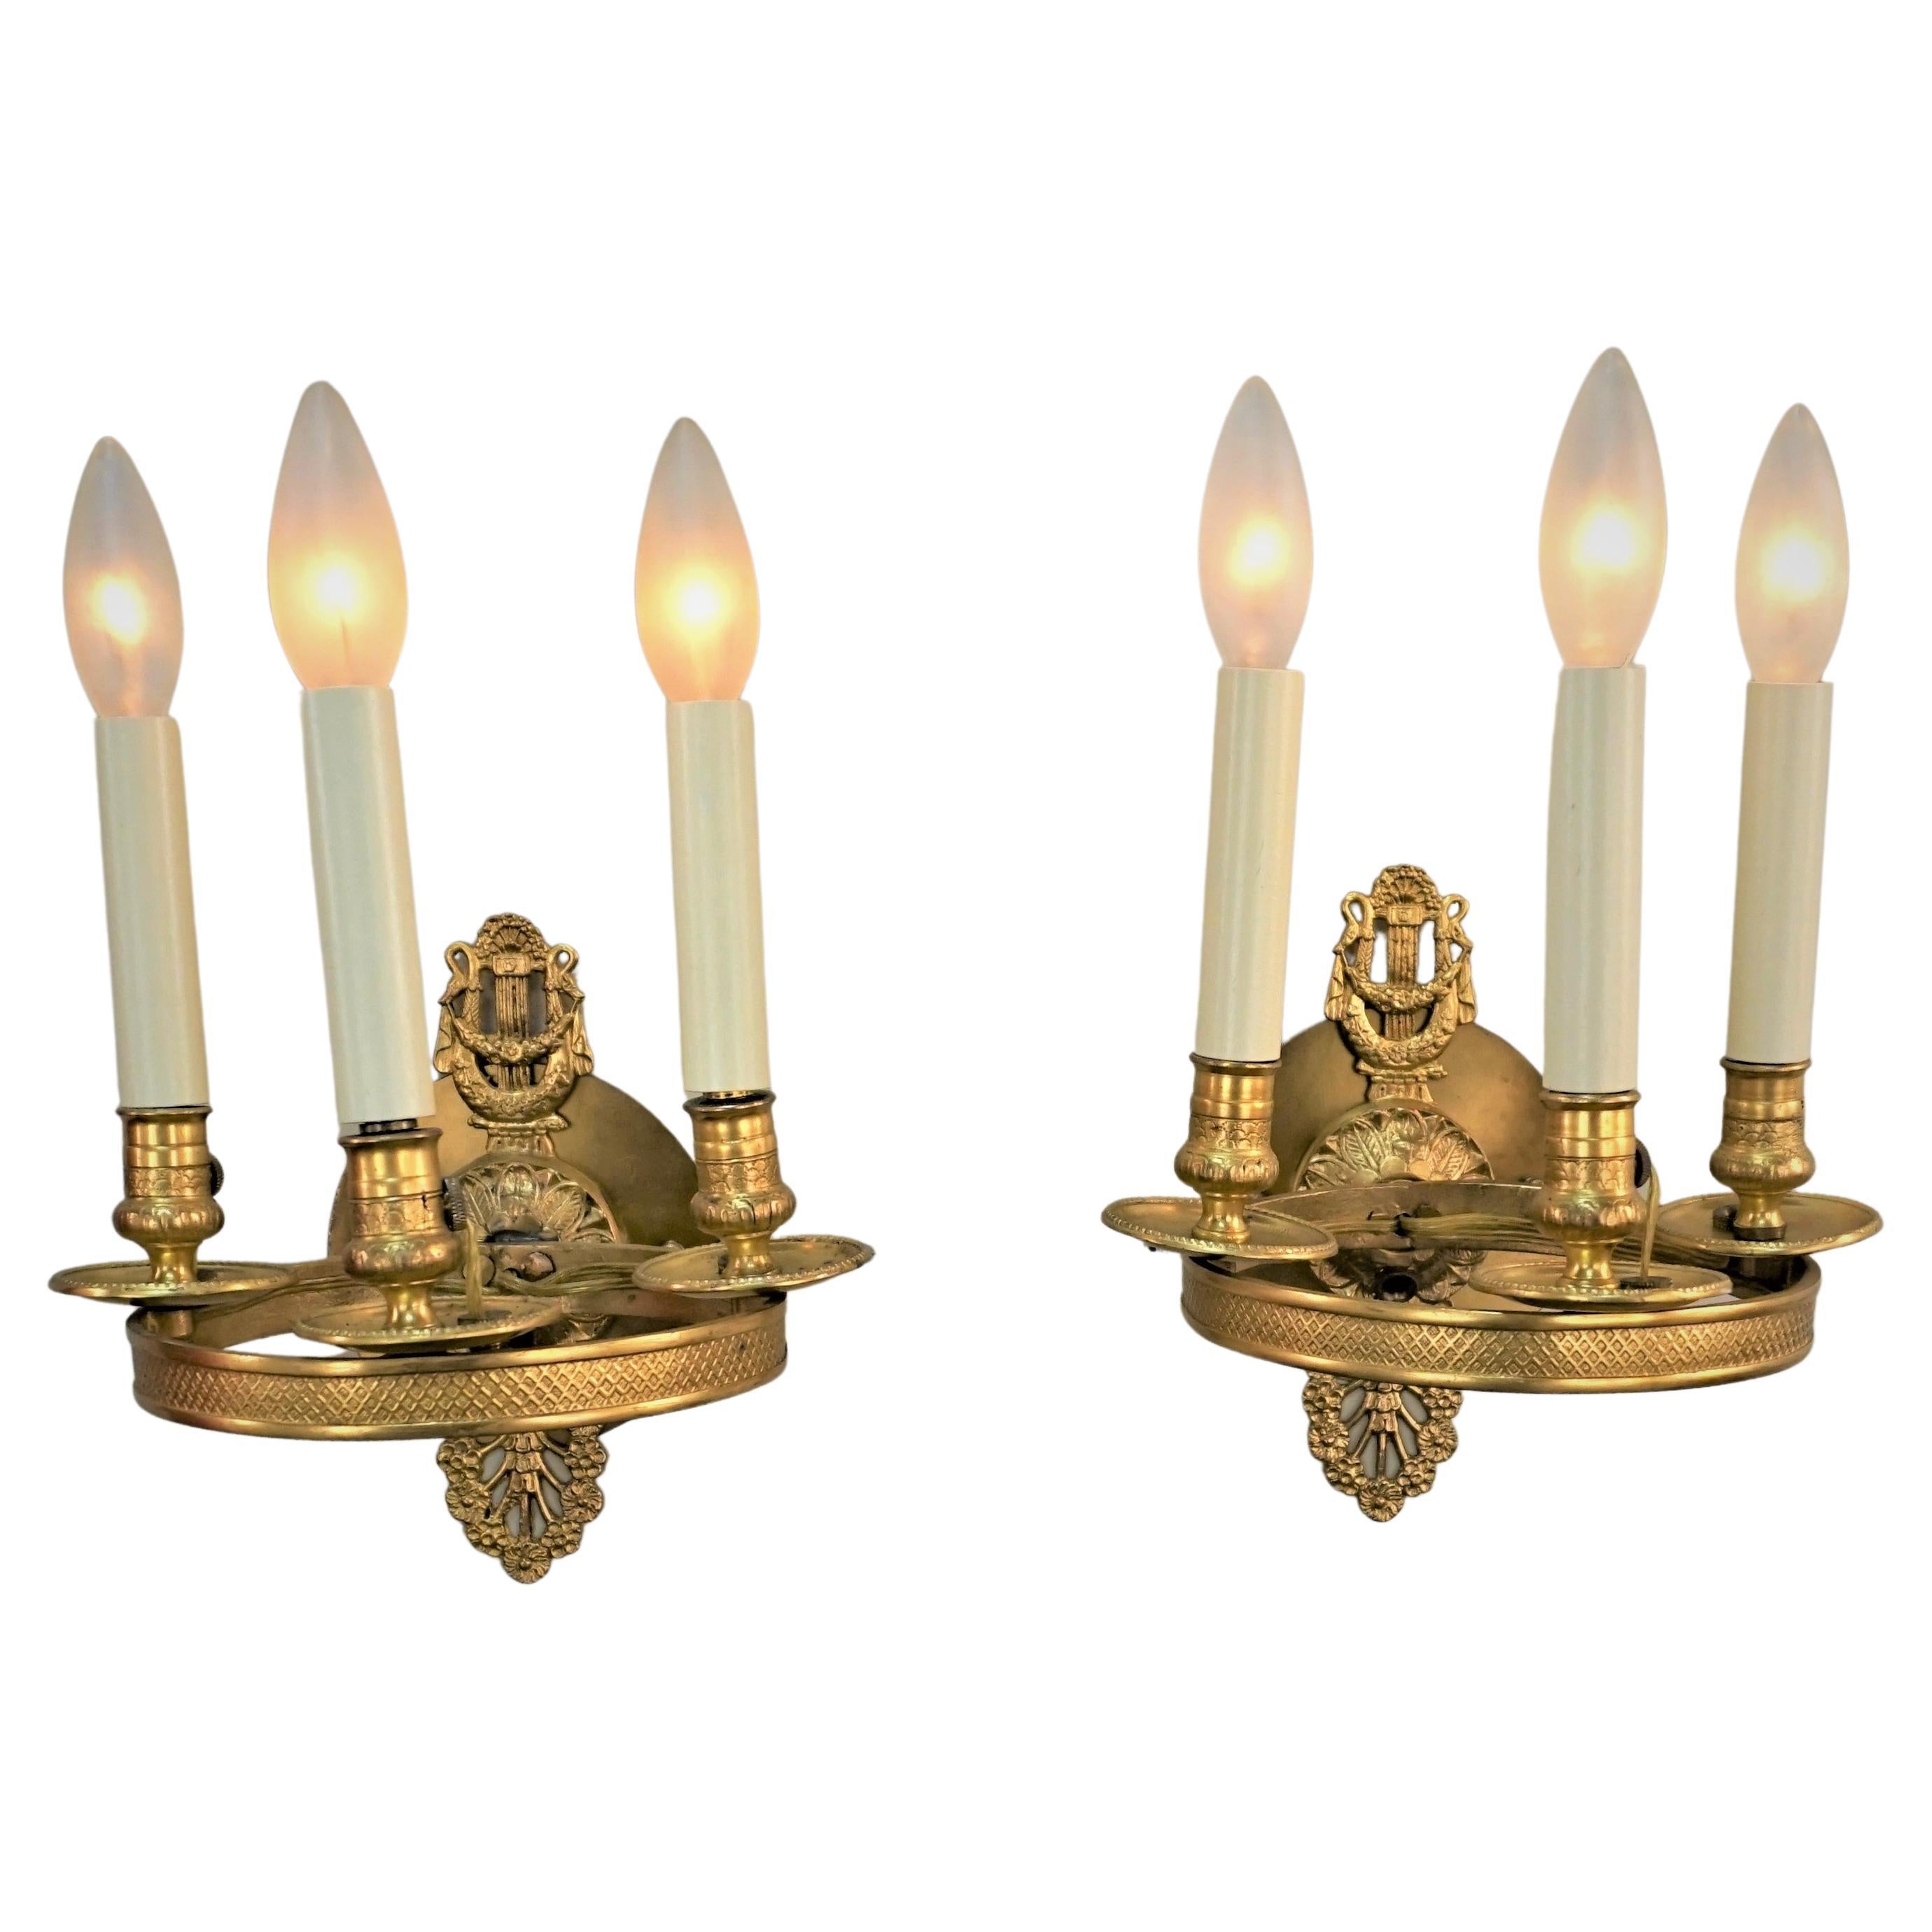 Pair of 19th Century Bronze Wall Sconces.